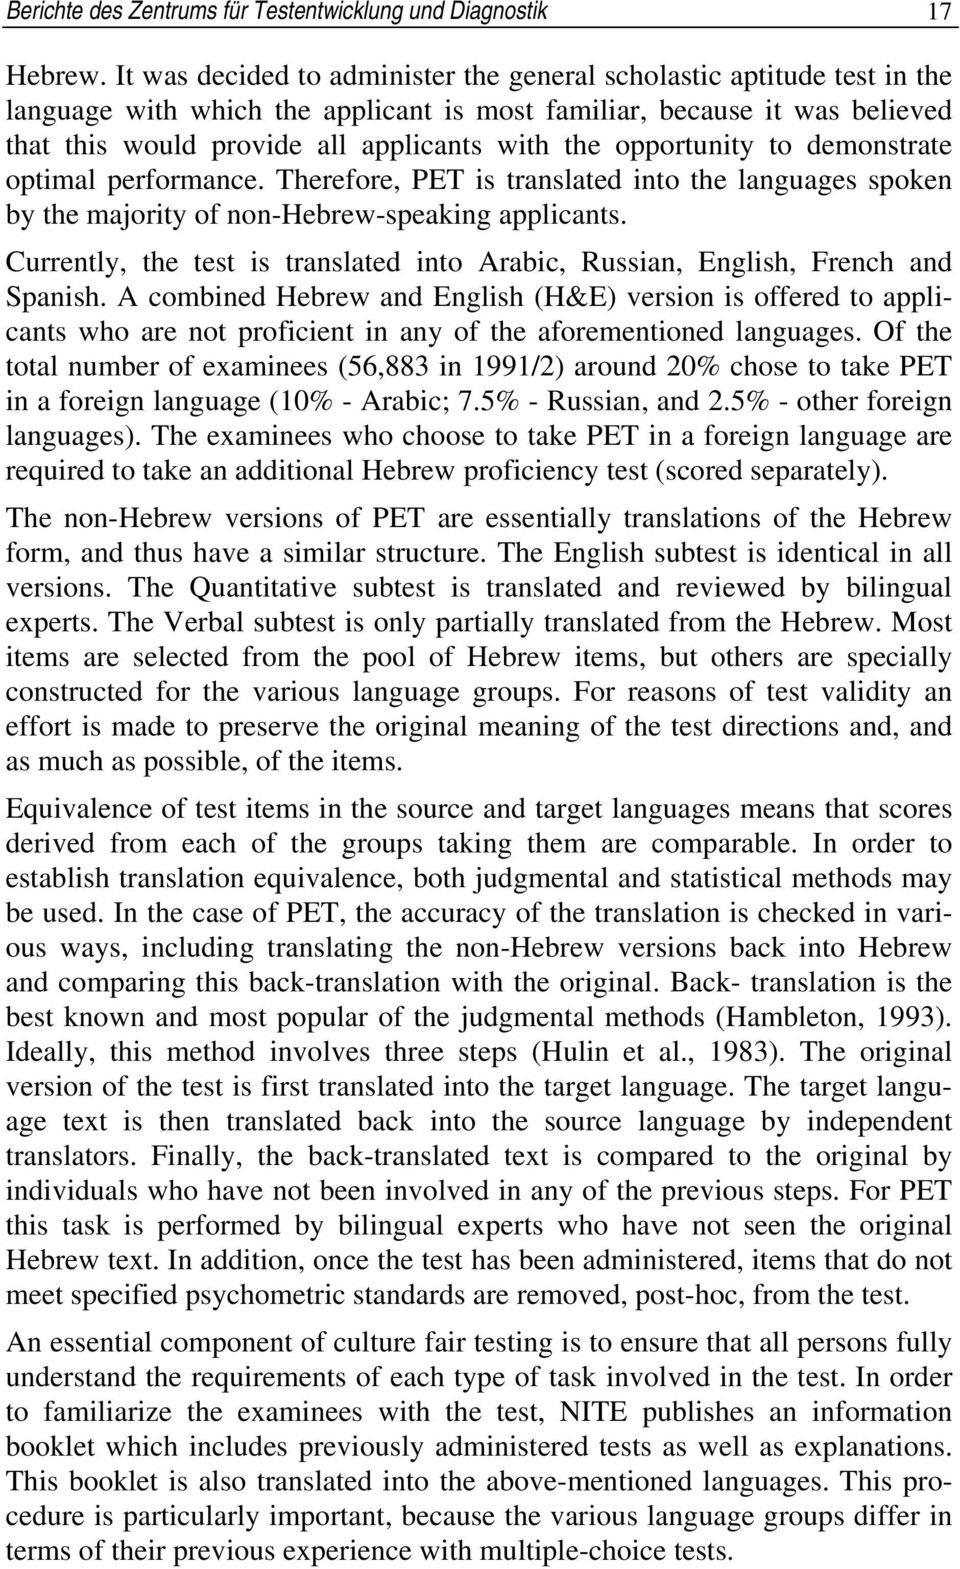 opportunity to demonstrate optimal performance. Therefore, PET is translated into the languages spoken by the majority of non-hebrew-speaking applicants.